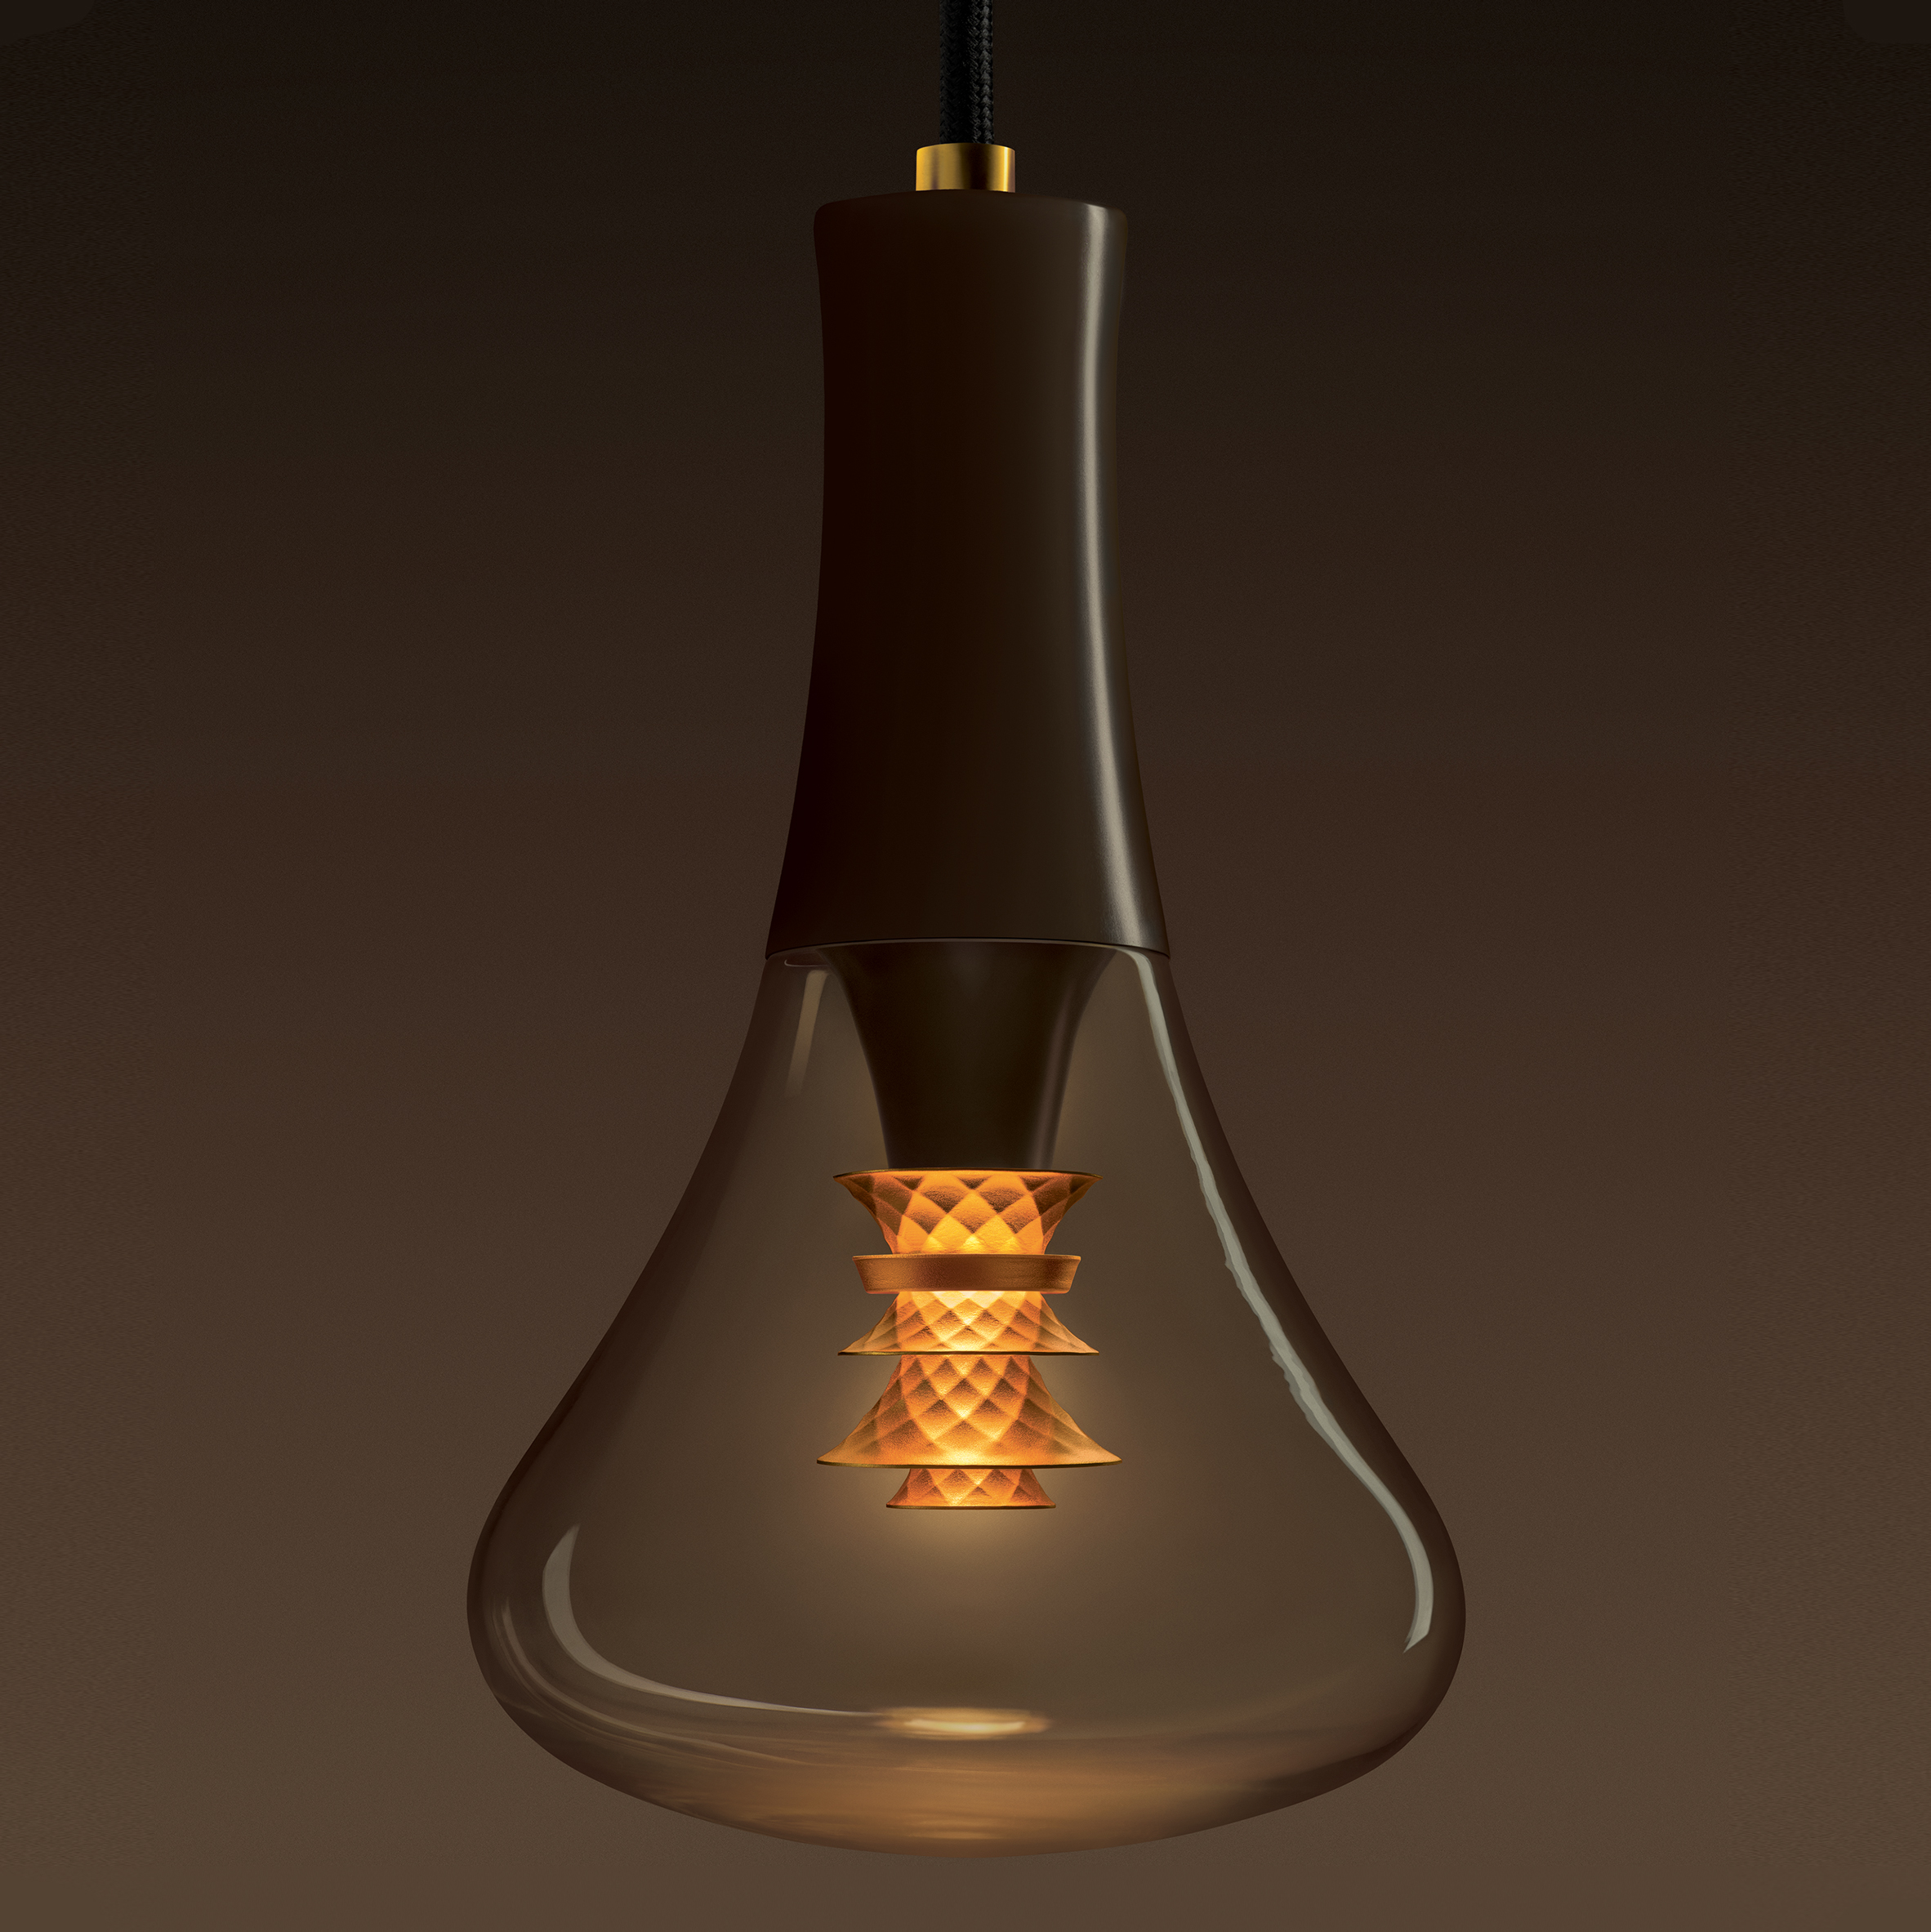 Plumen designs bulb with faceted gold internal shade